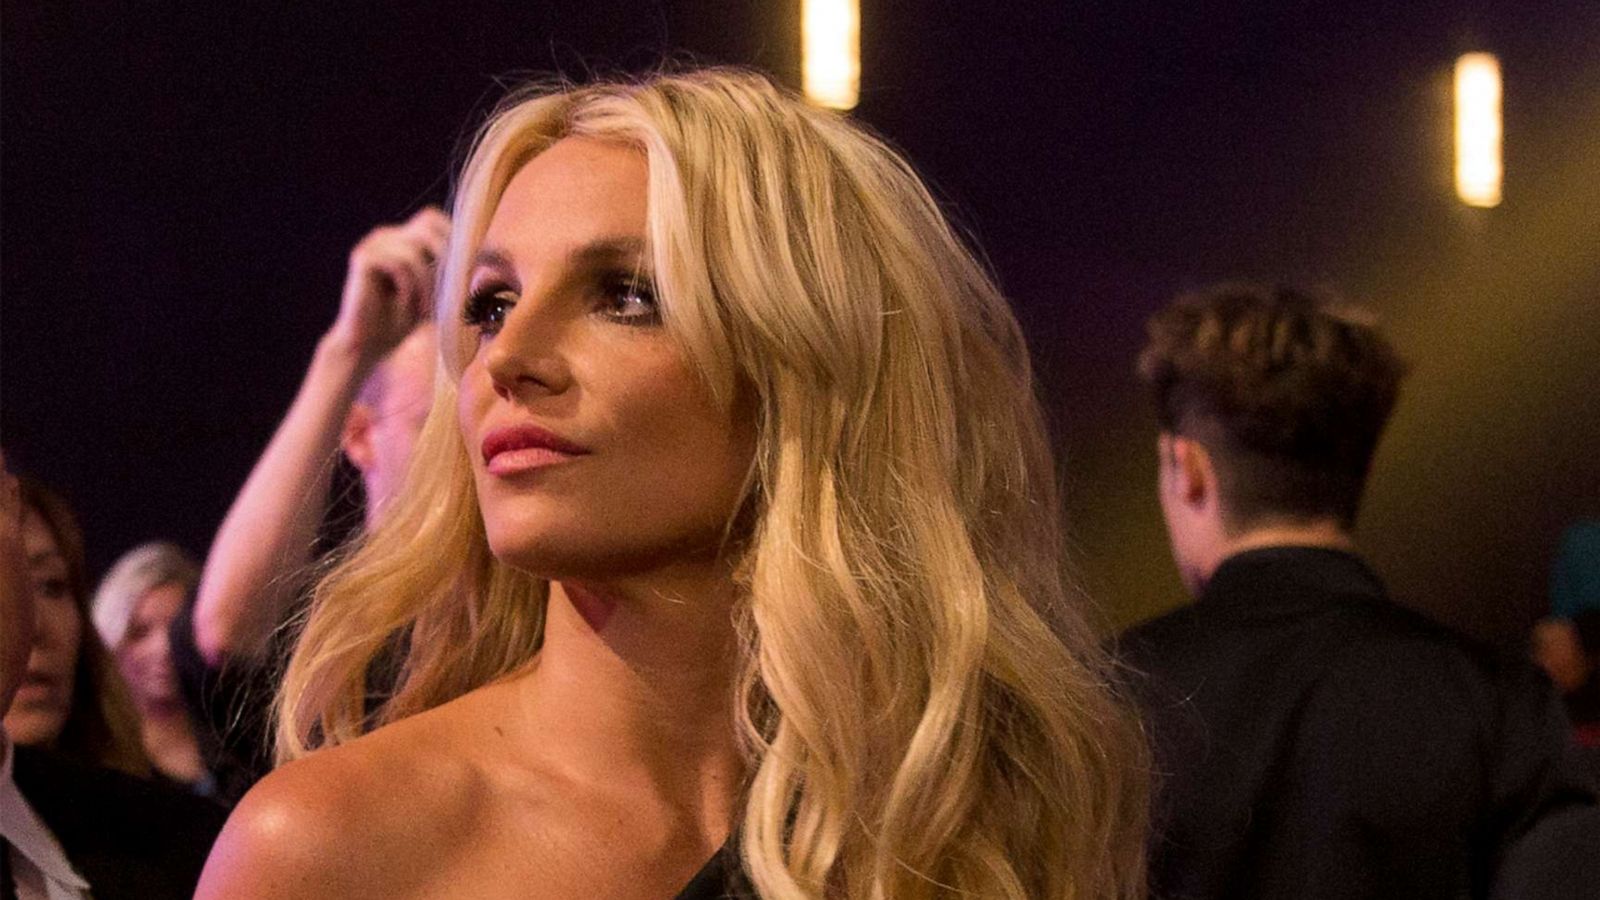 Britney Spears reveals she had abortion with Justin Timberlake